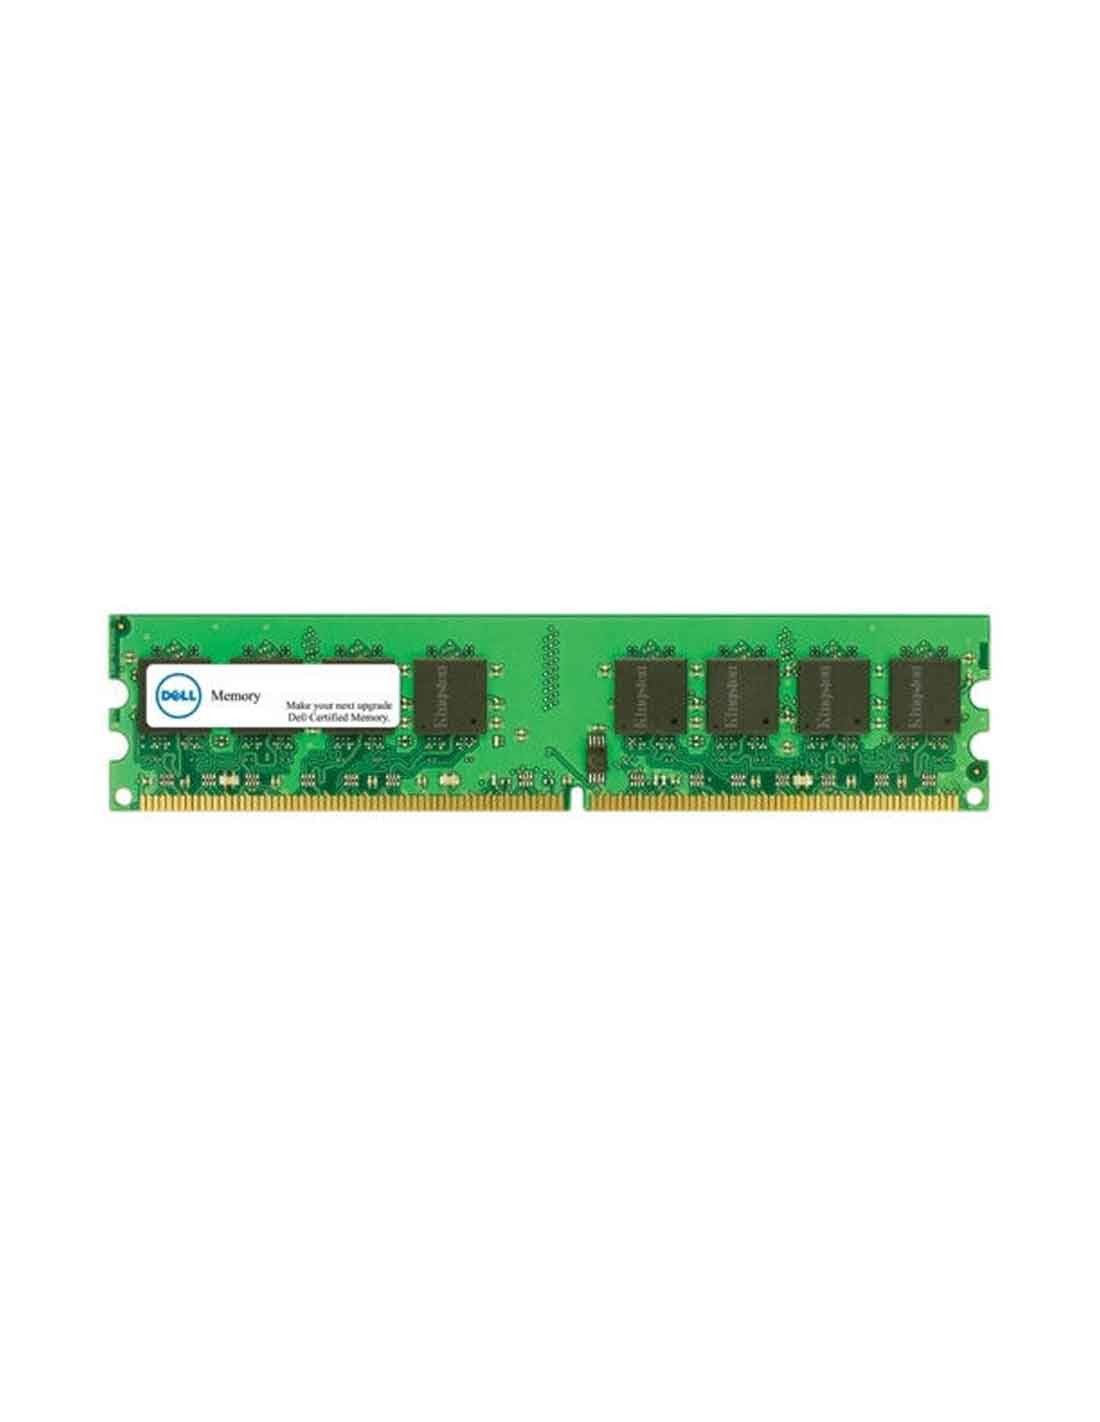 Dell 16GB Certified Memory Module at a cheap price and fast free delivery in Dubai